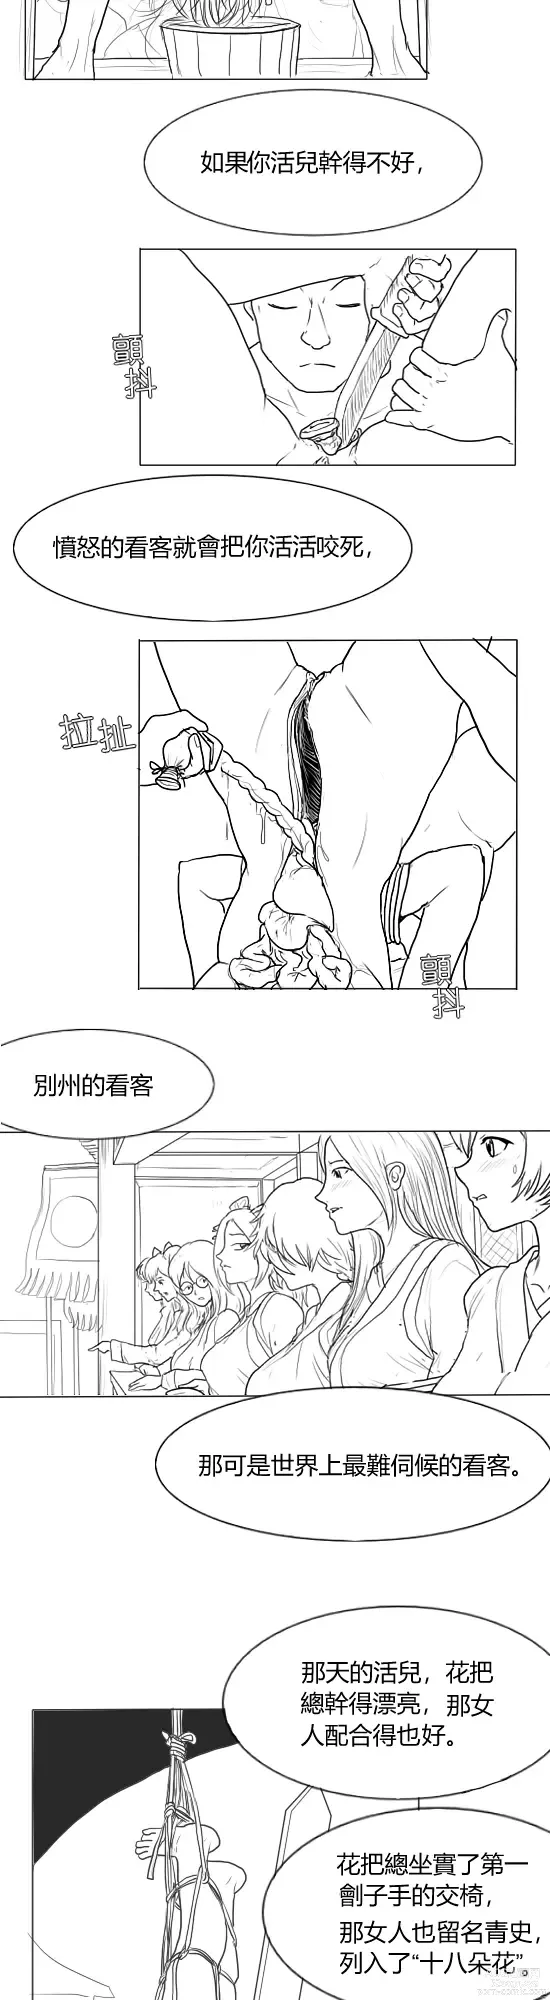 Page 10 of doujinshi 落英  第一话